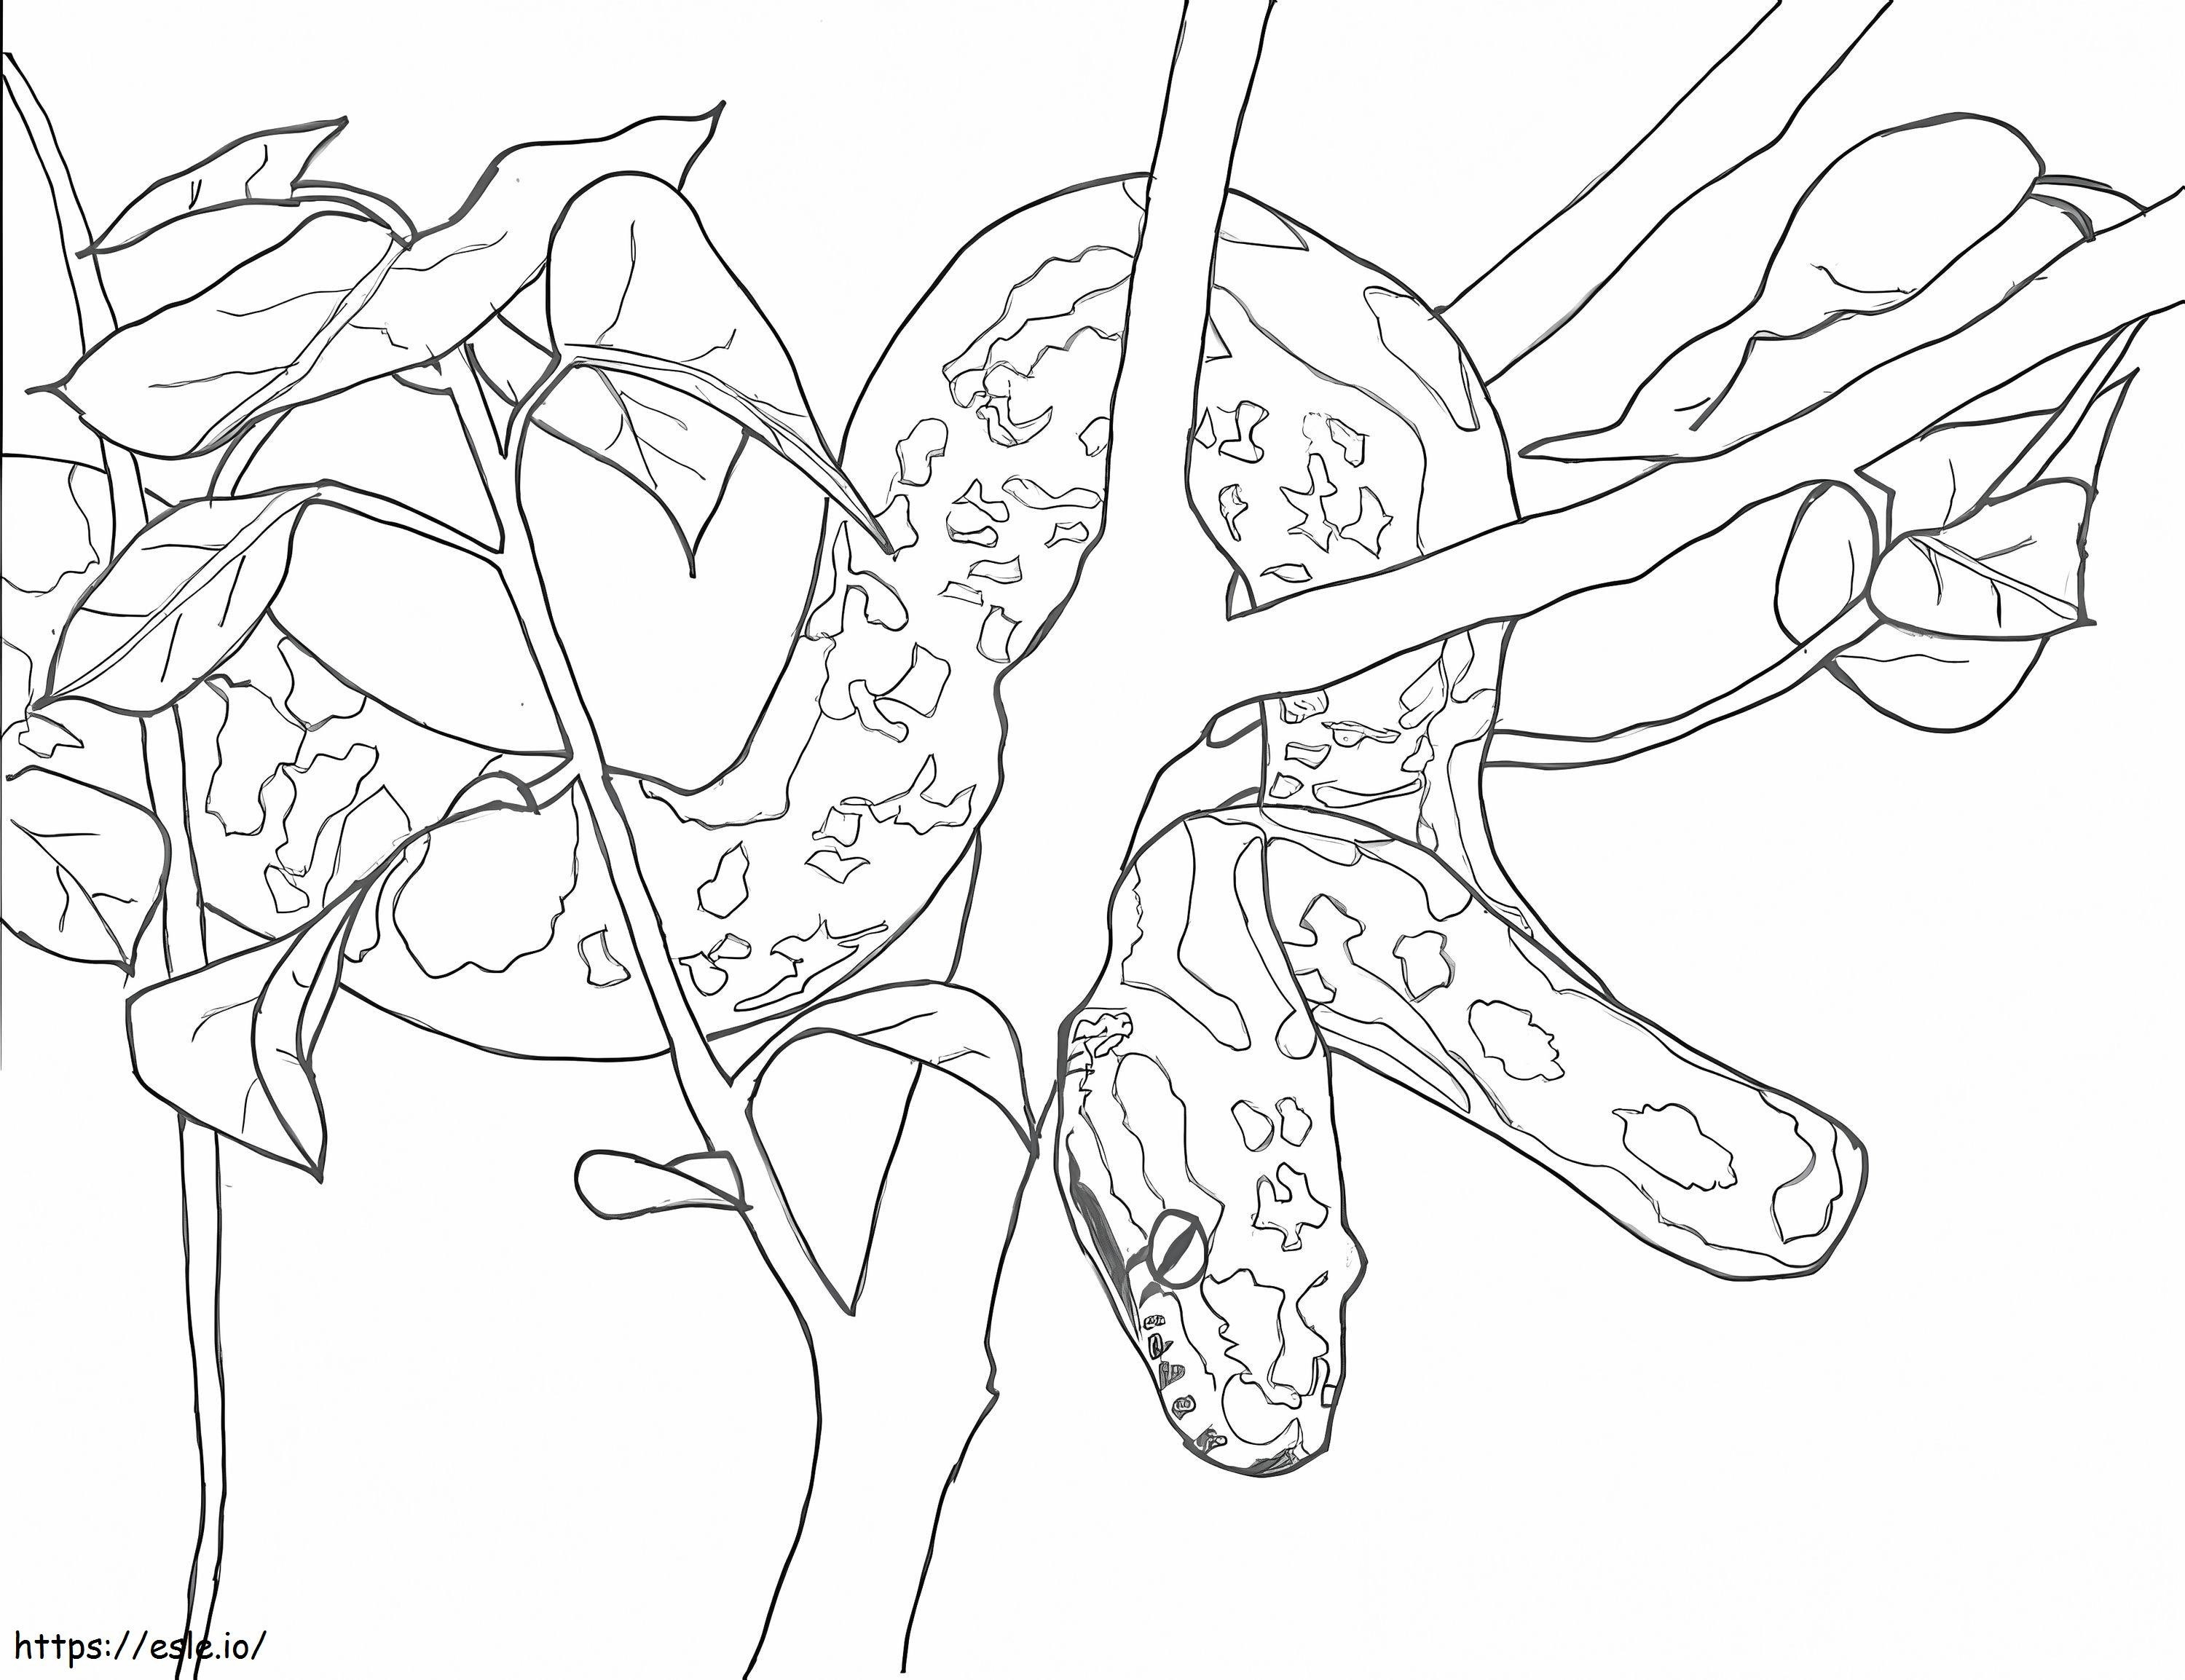 Python On Tree Branch coloring page